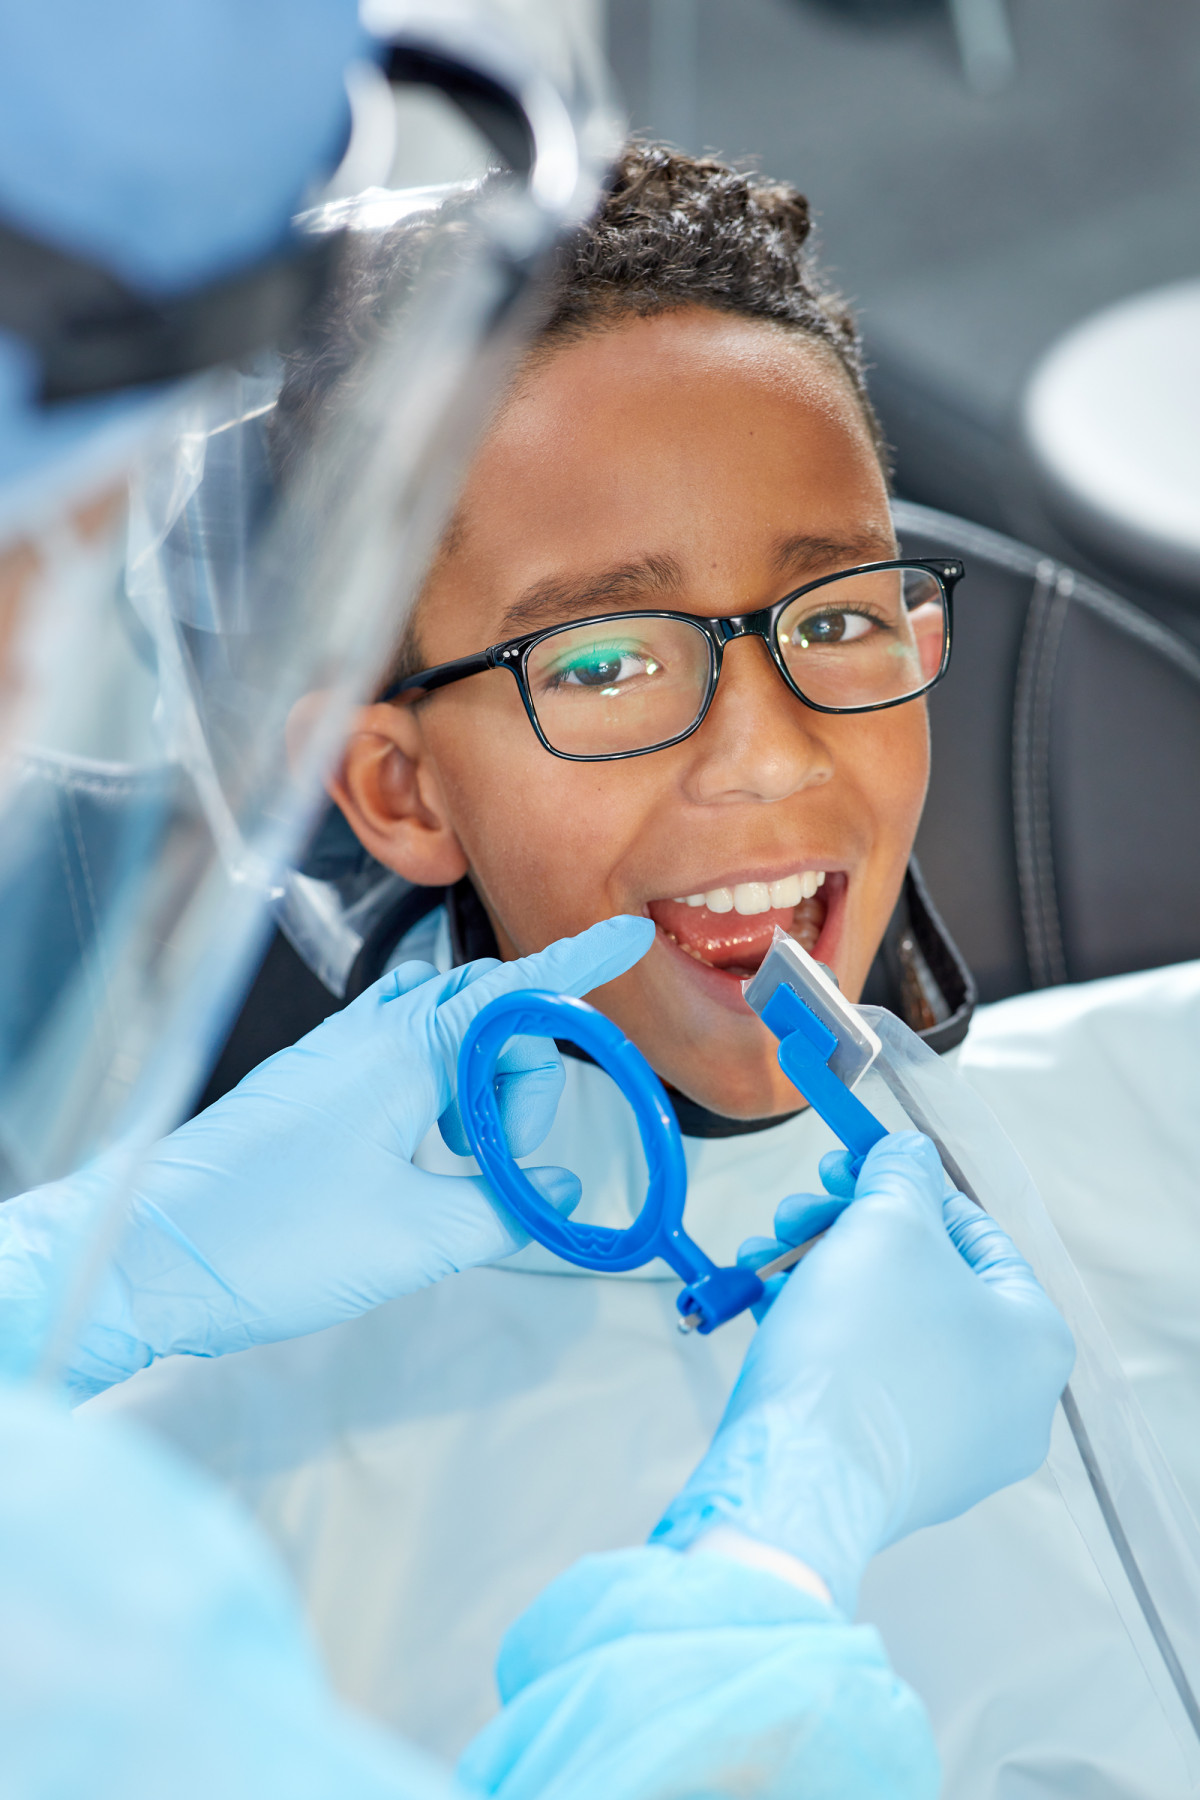 Young boy in dentist chair being prepped for x-rays